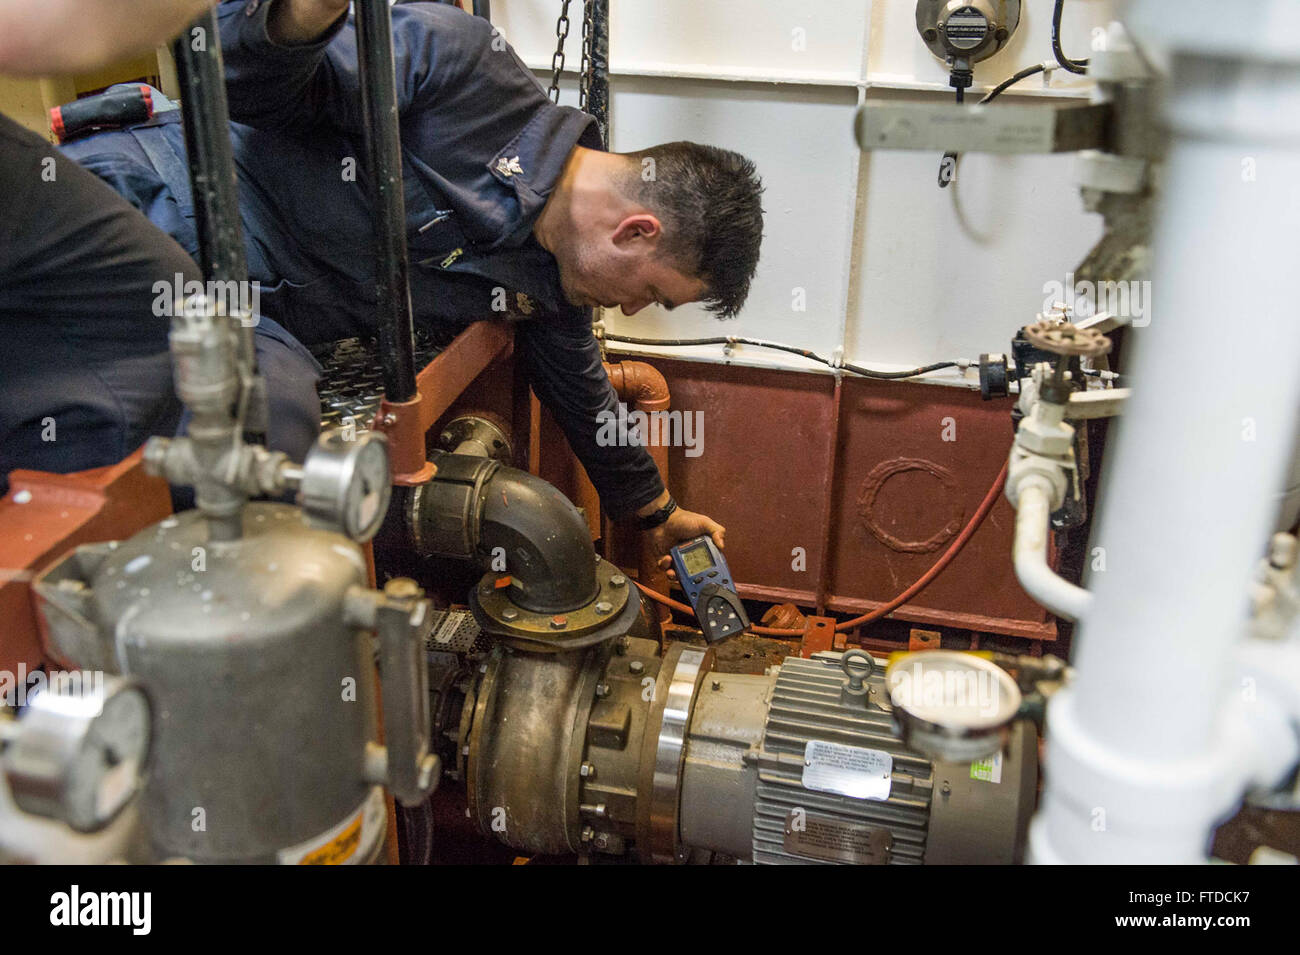 150518-N-XB010-179 MEDITERRANEAN SEA (May 18, 2015) Hull Technician 1st Class Jesse James, from Langlois, Oregon, takes a chemical level reading of an aft vacuum, collection, holding and transfer pump in a main shaft space aboard USS Laboon (DDG 58) May 18, 2015. Laboon, an Arleigh Burke-class guided-missile destroyer, homeported in Norfolk, is conducting naval operations in the U.S. 6th Fleet area of operations in support of U.S. national security interests in Europe. (U.S. Navy photo by Mass Communication Specialist 3rd Class Desmond Parks/Released) Stock Photo